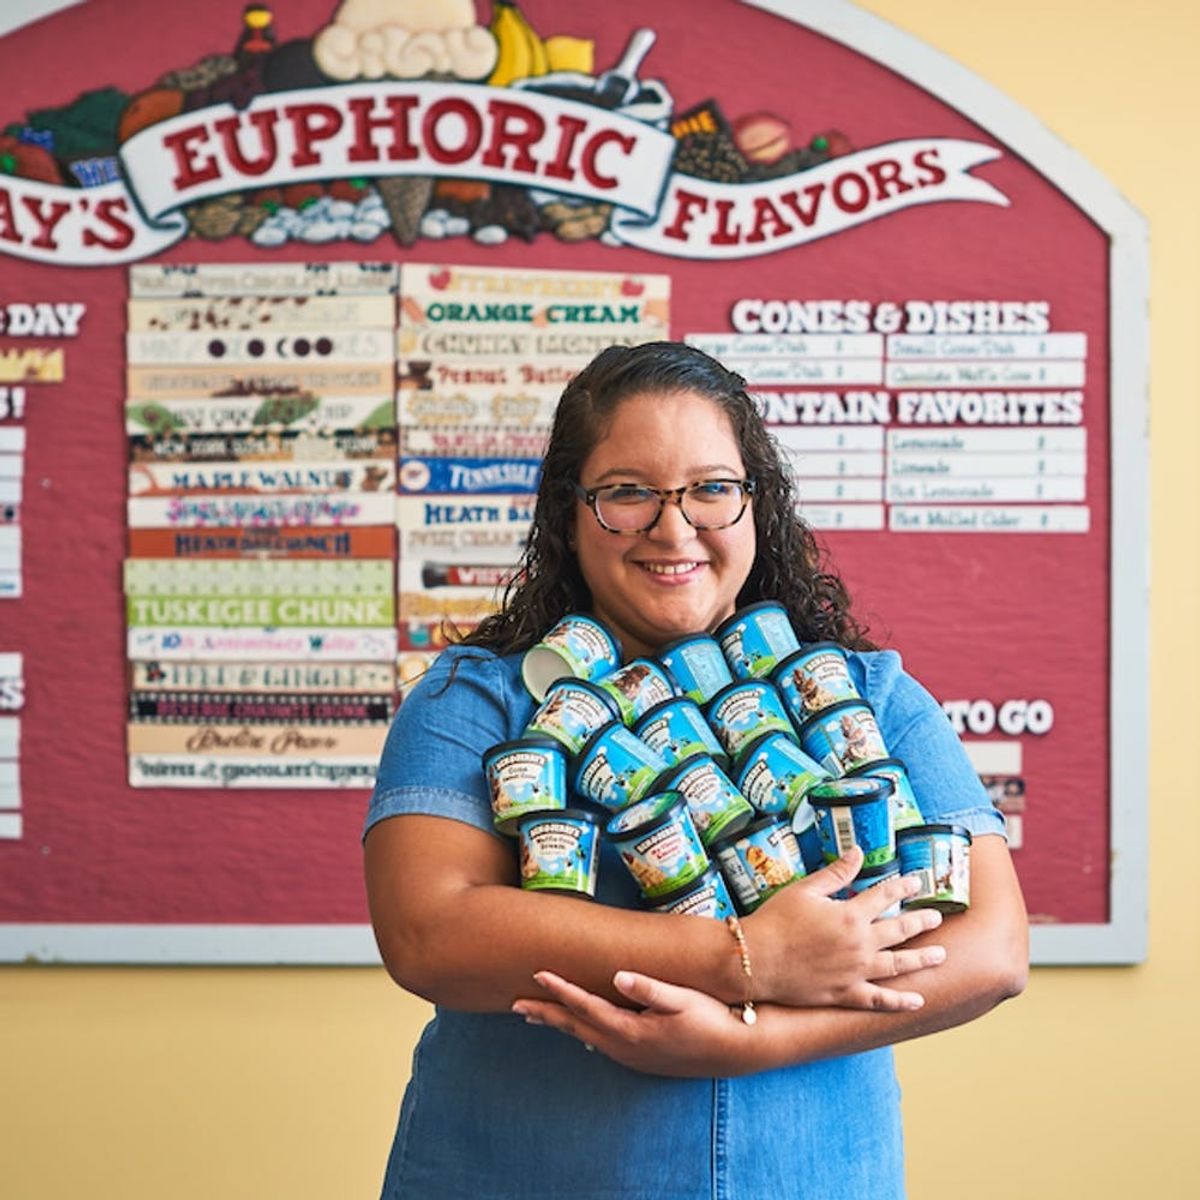 This Woman’s Entire Job Is to Create New Ben & Jerry’s Ice Cream Flavors